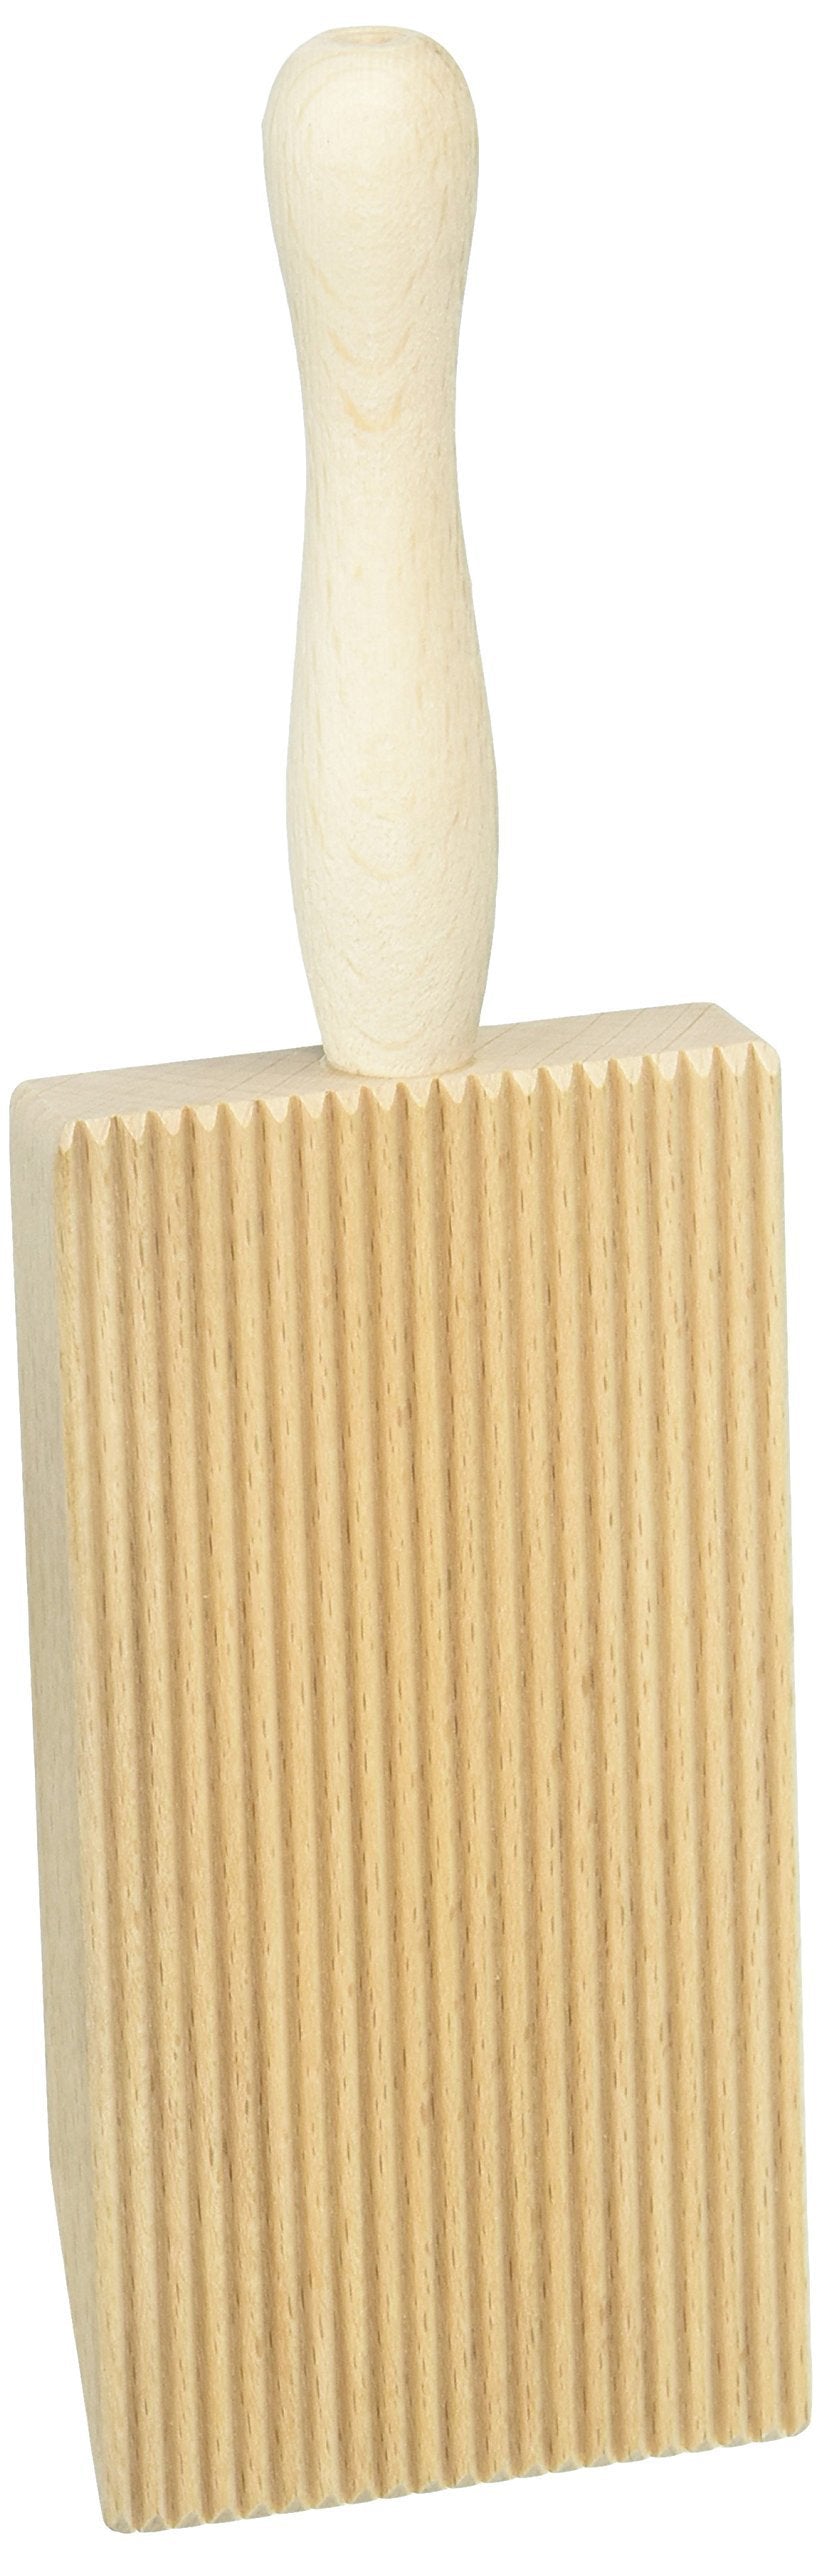 Eppicotispai Natural Beechwood Quick Gnocchi Stripper and Paddle